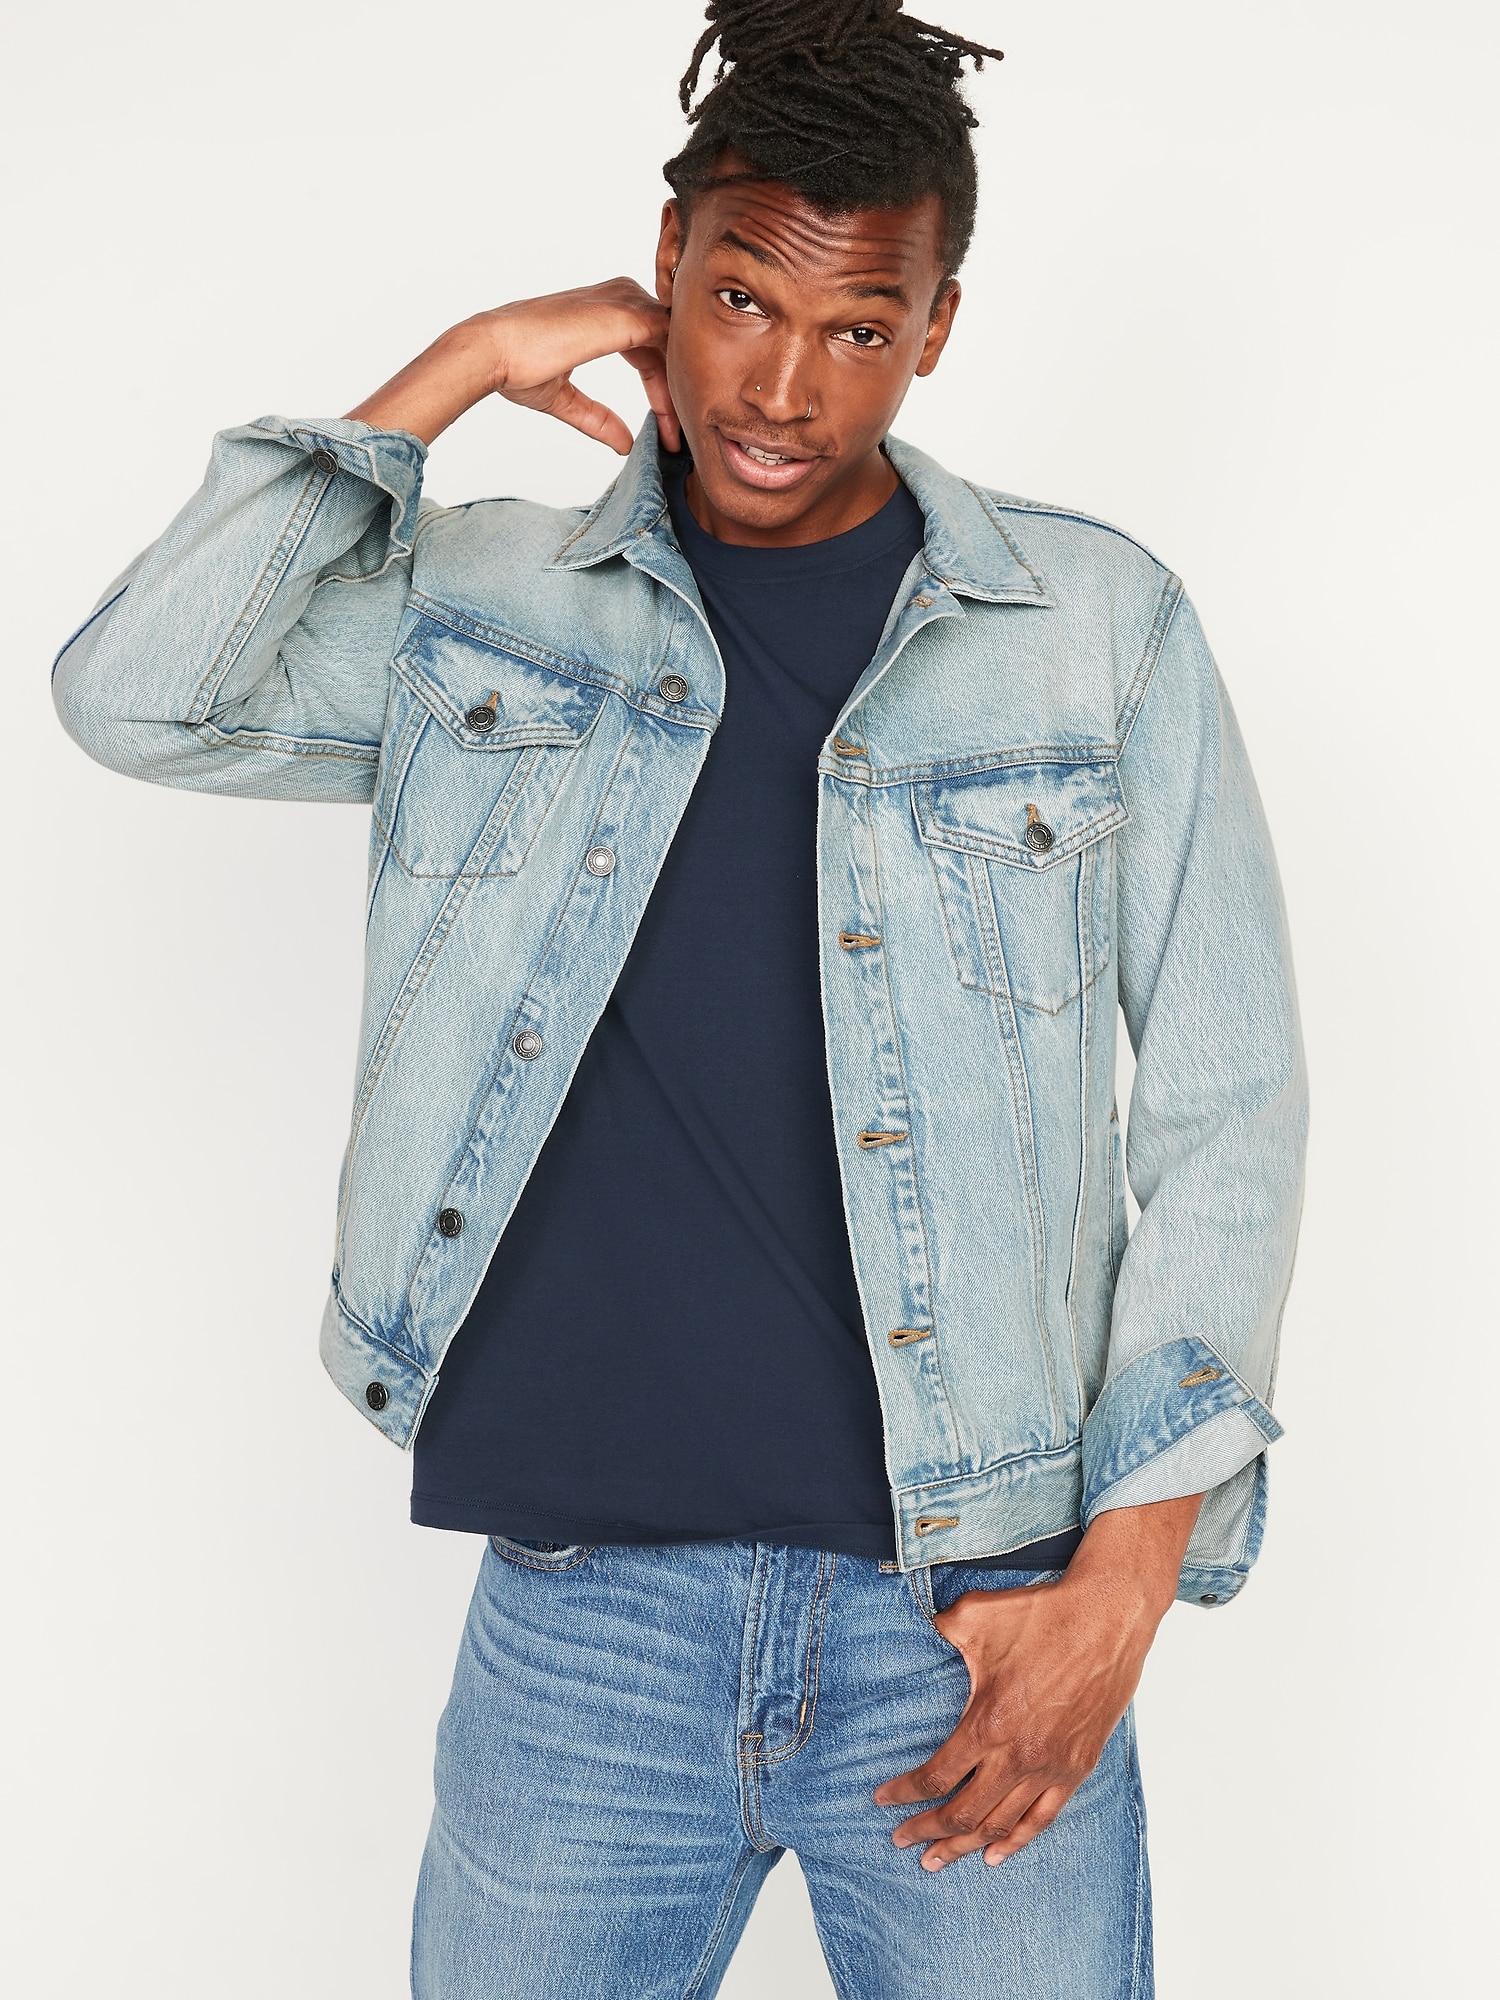 U.S. Flag Graphic Gender-Neutral Jean Jacket for Adults | Old Navy